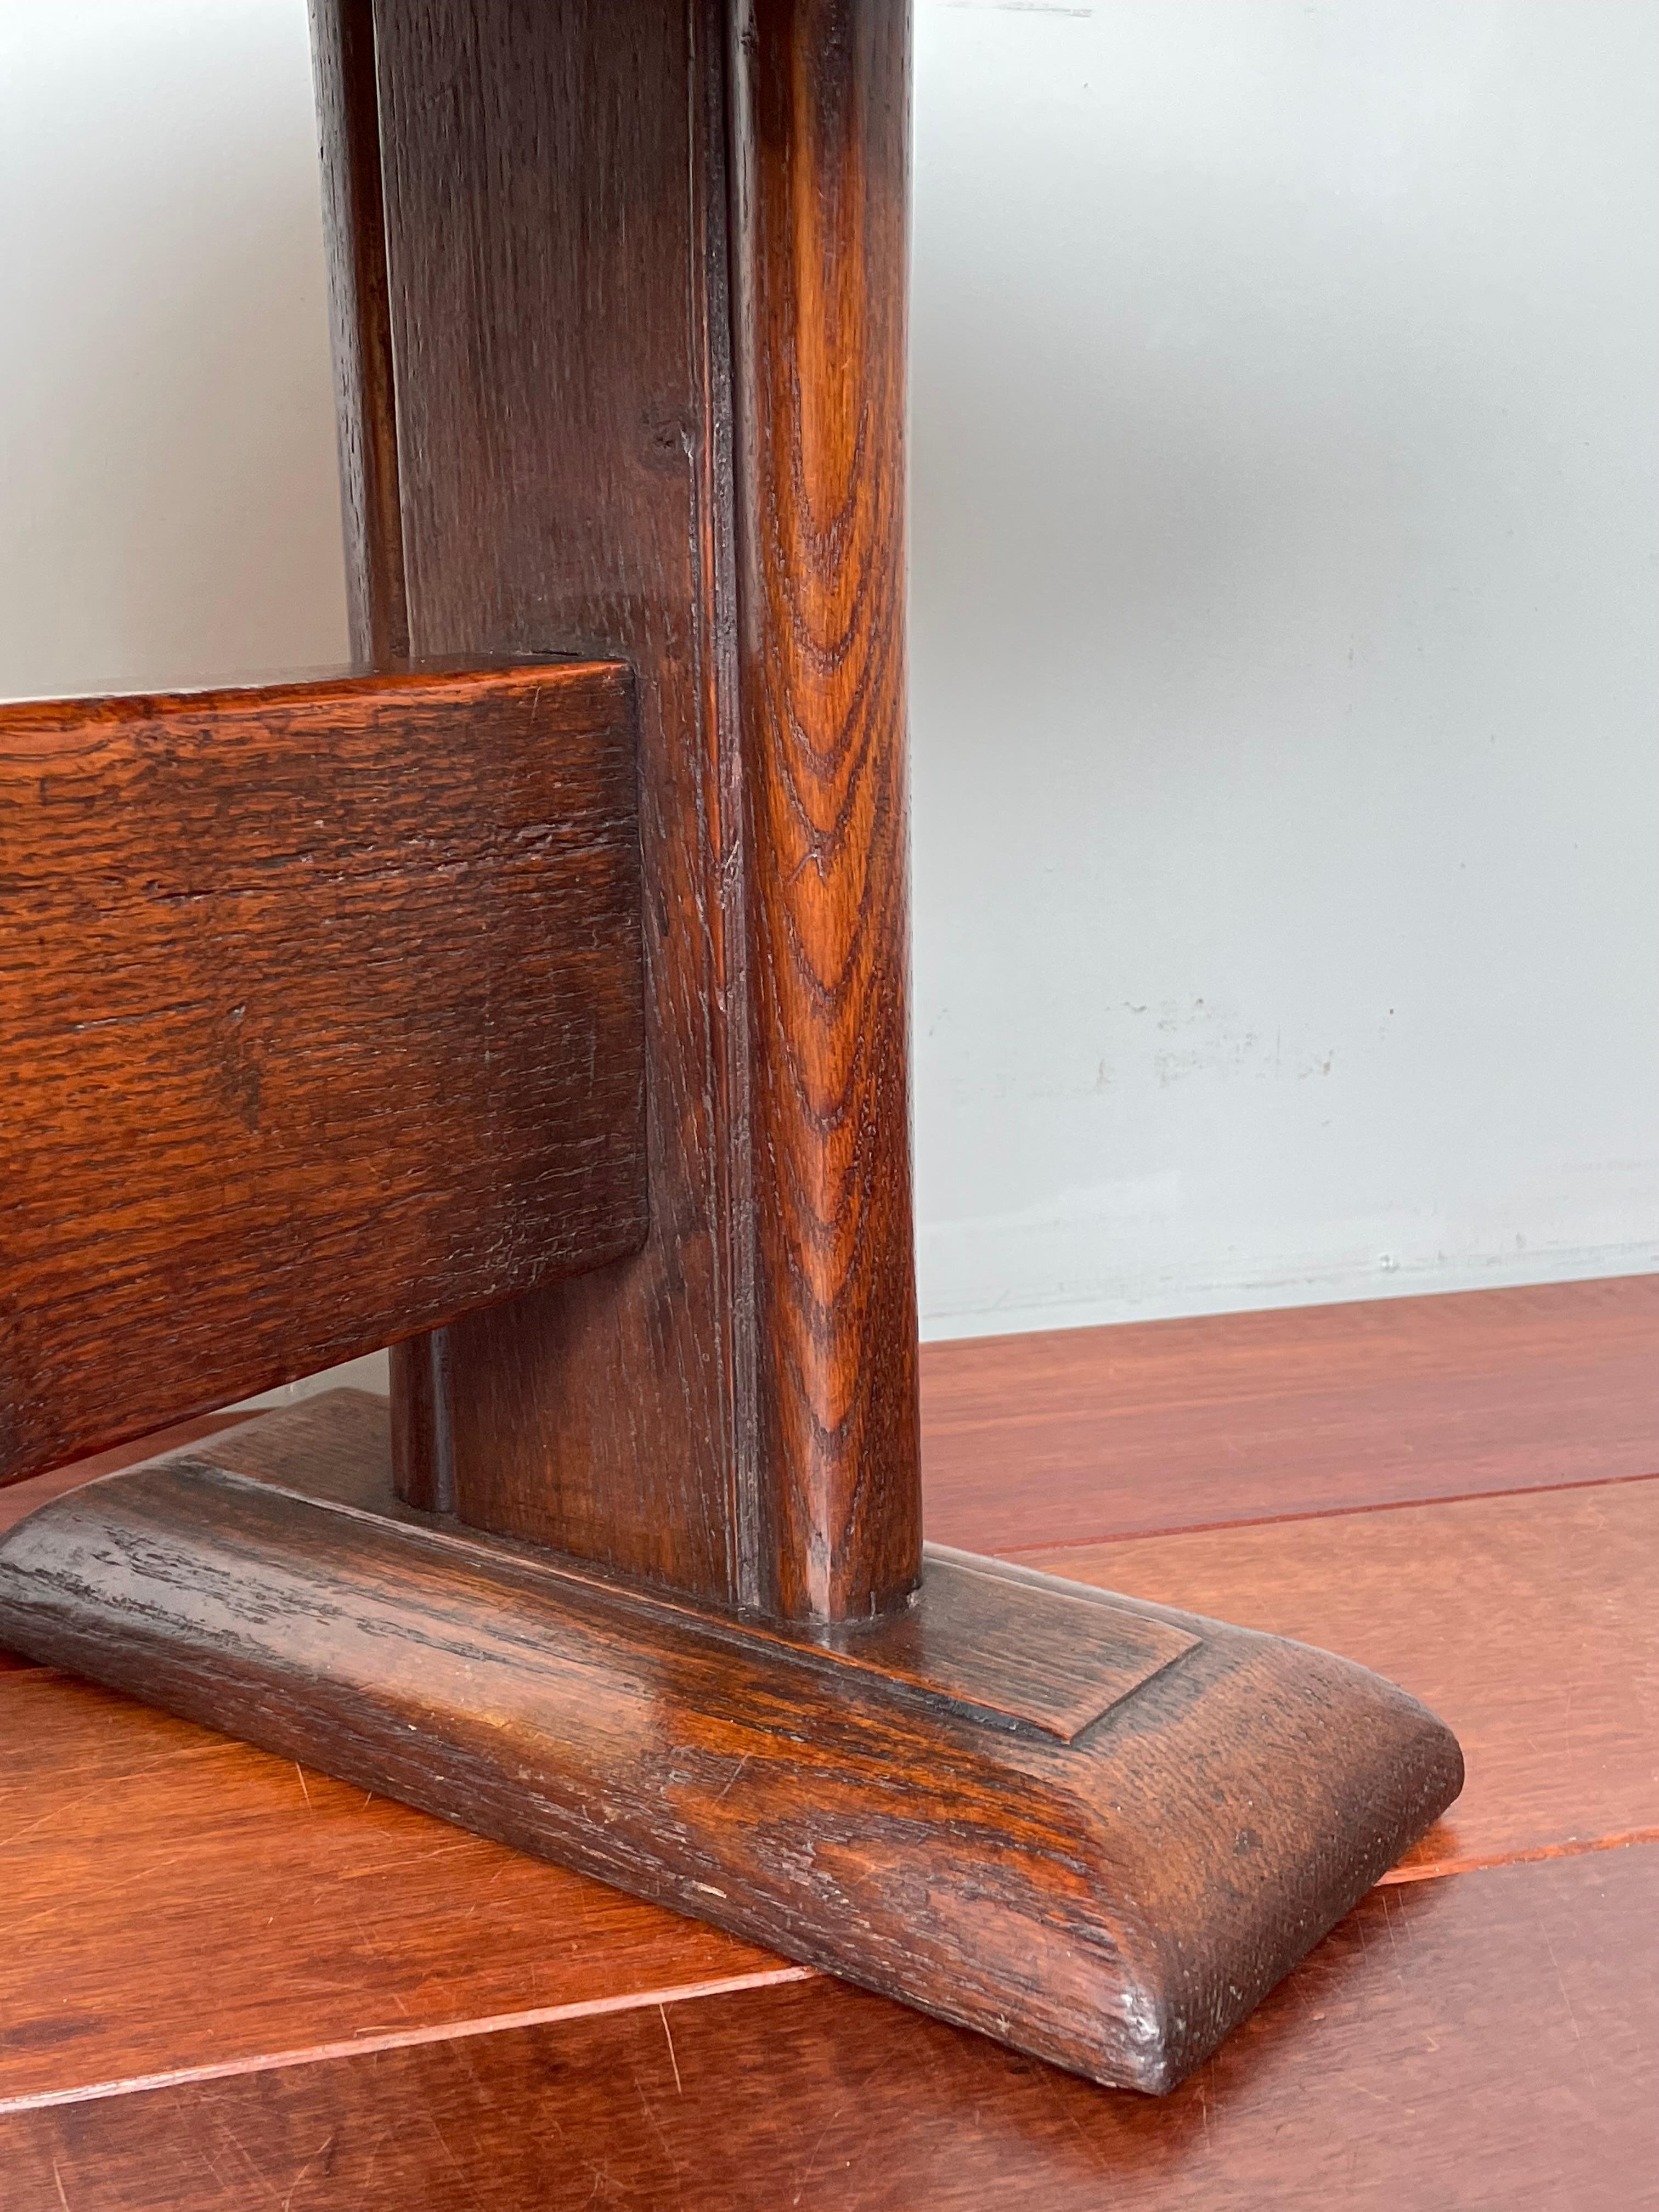 Gothic Revival Stool / Bench with Hand Carved Christ on Crucifix Sculpture 1800s For Sale 6